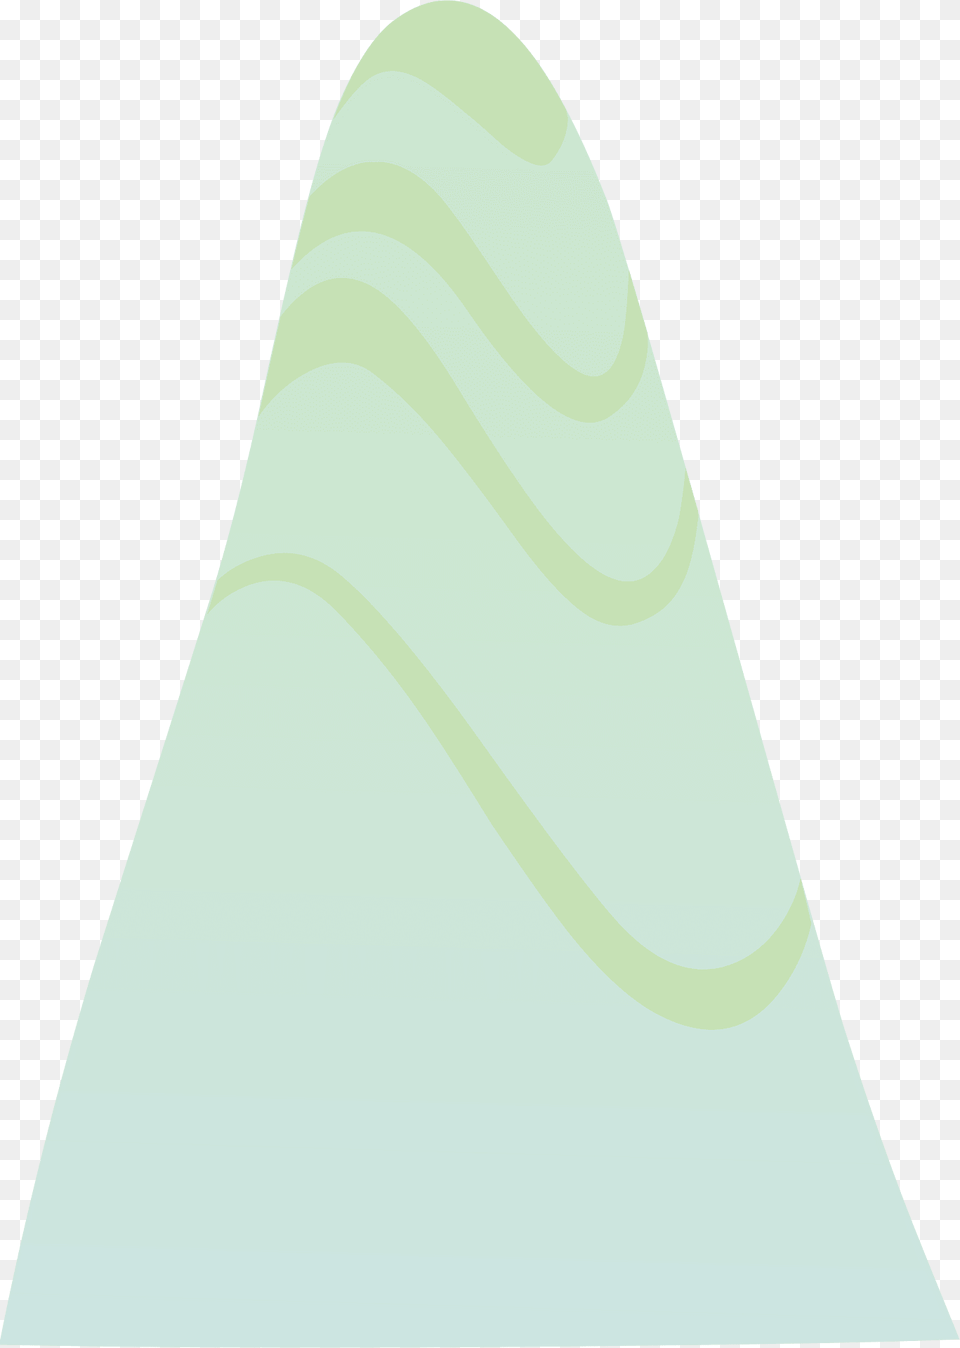 Light Green Fantasy Hill Clipart, Triangle Free Png Download